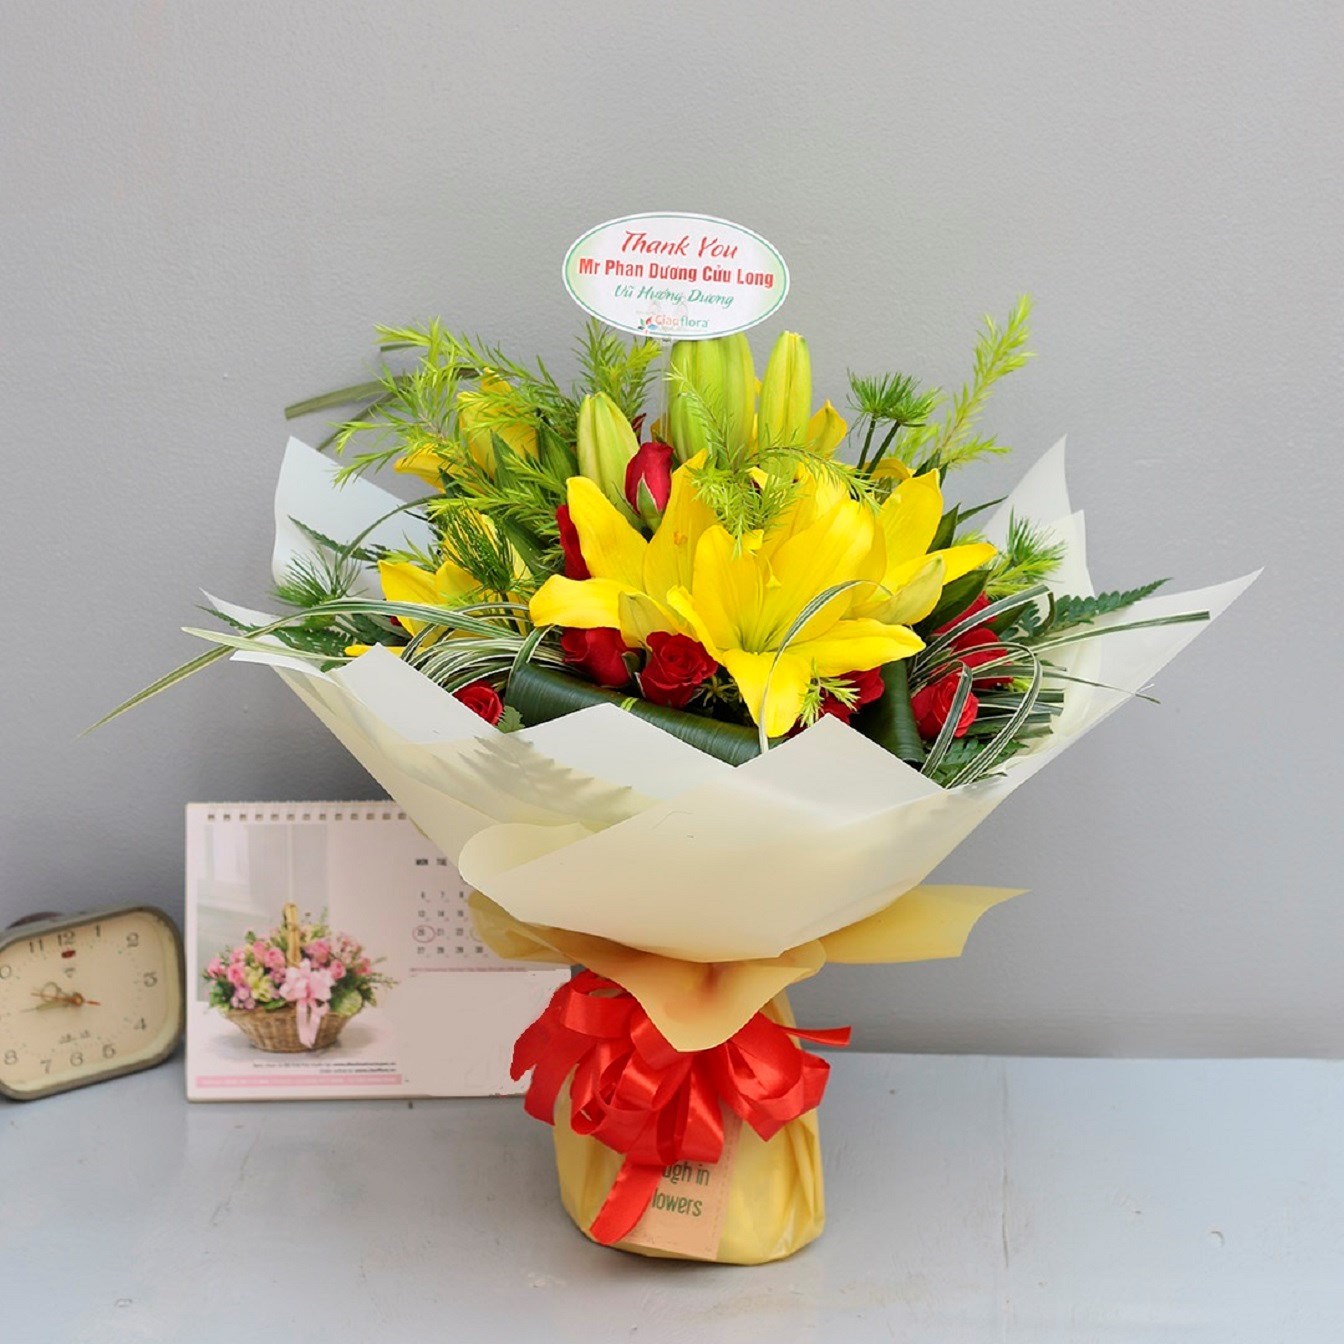 Yellow lilies with red and green